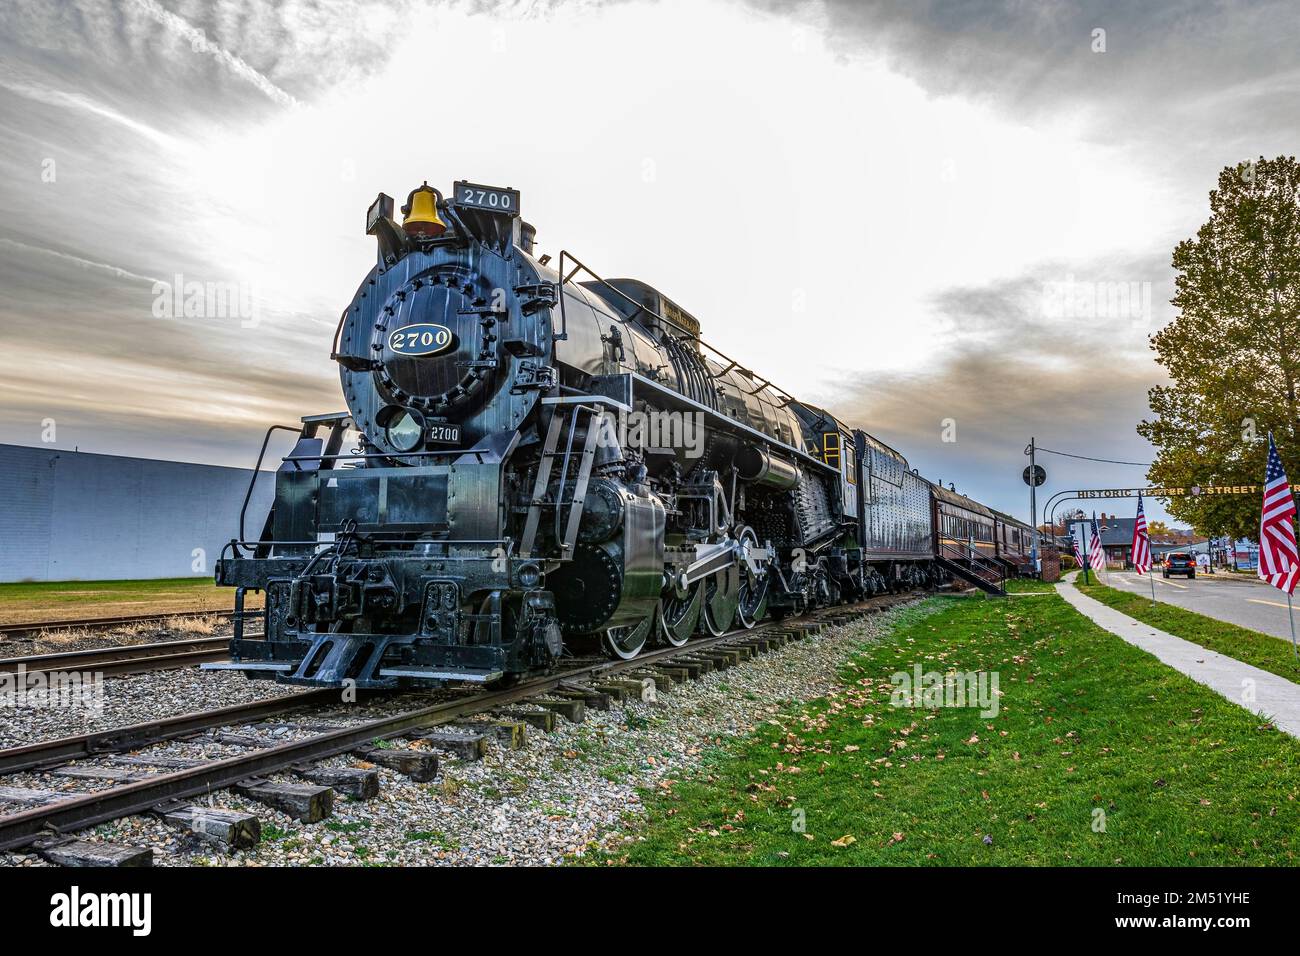 Dennison, Ohio, USA- Oct. 24, 2022: Locomotive on display at the Dennison Railroad Depot and Museum in the Historic Center Street District. Stock Photo